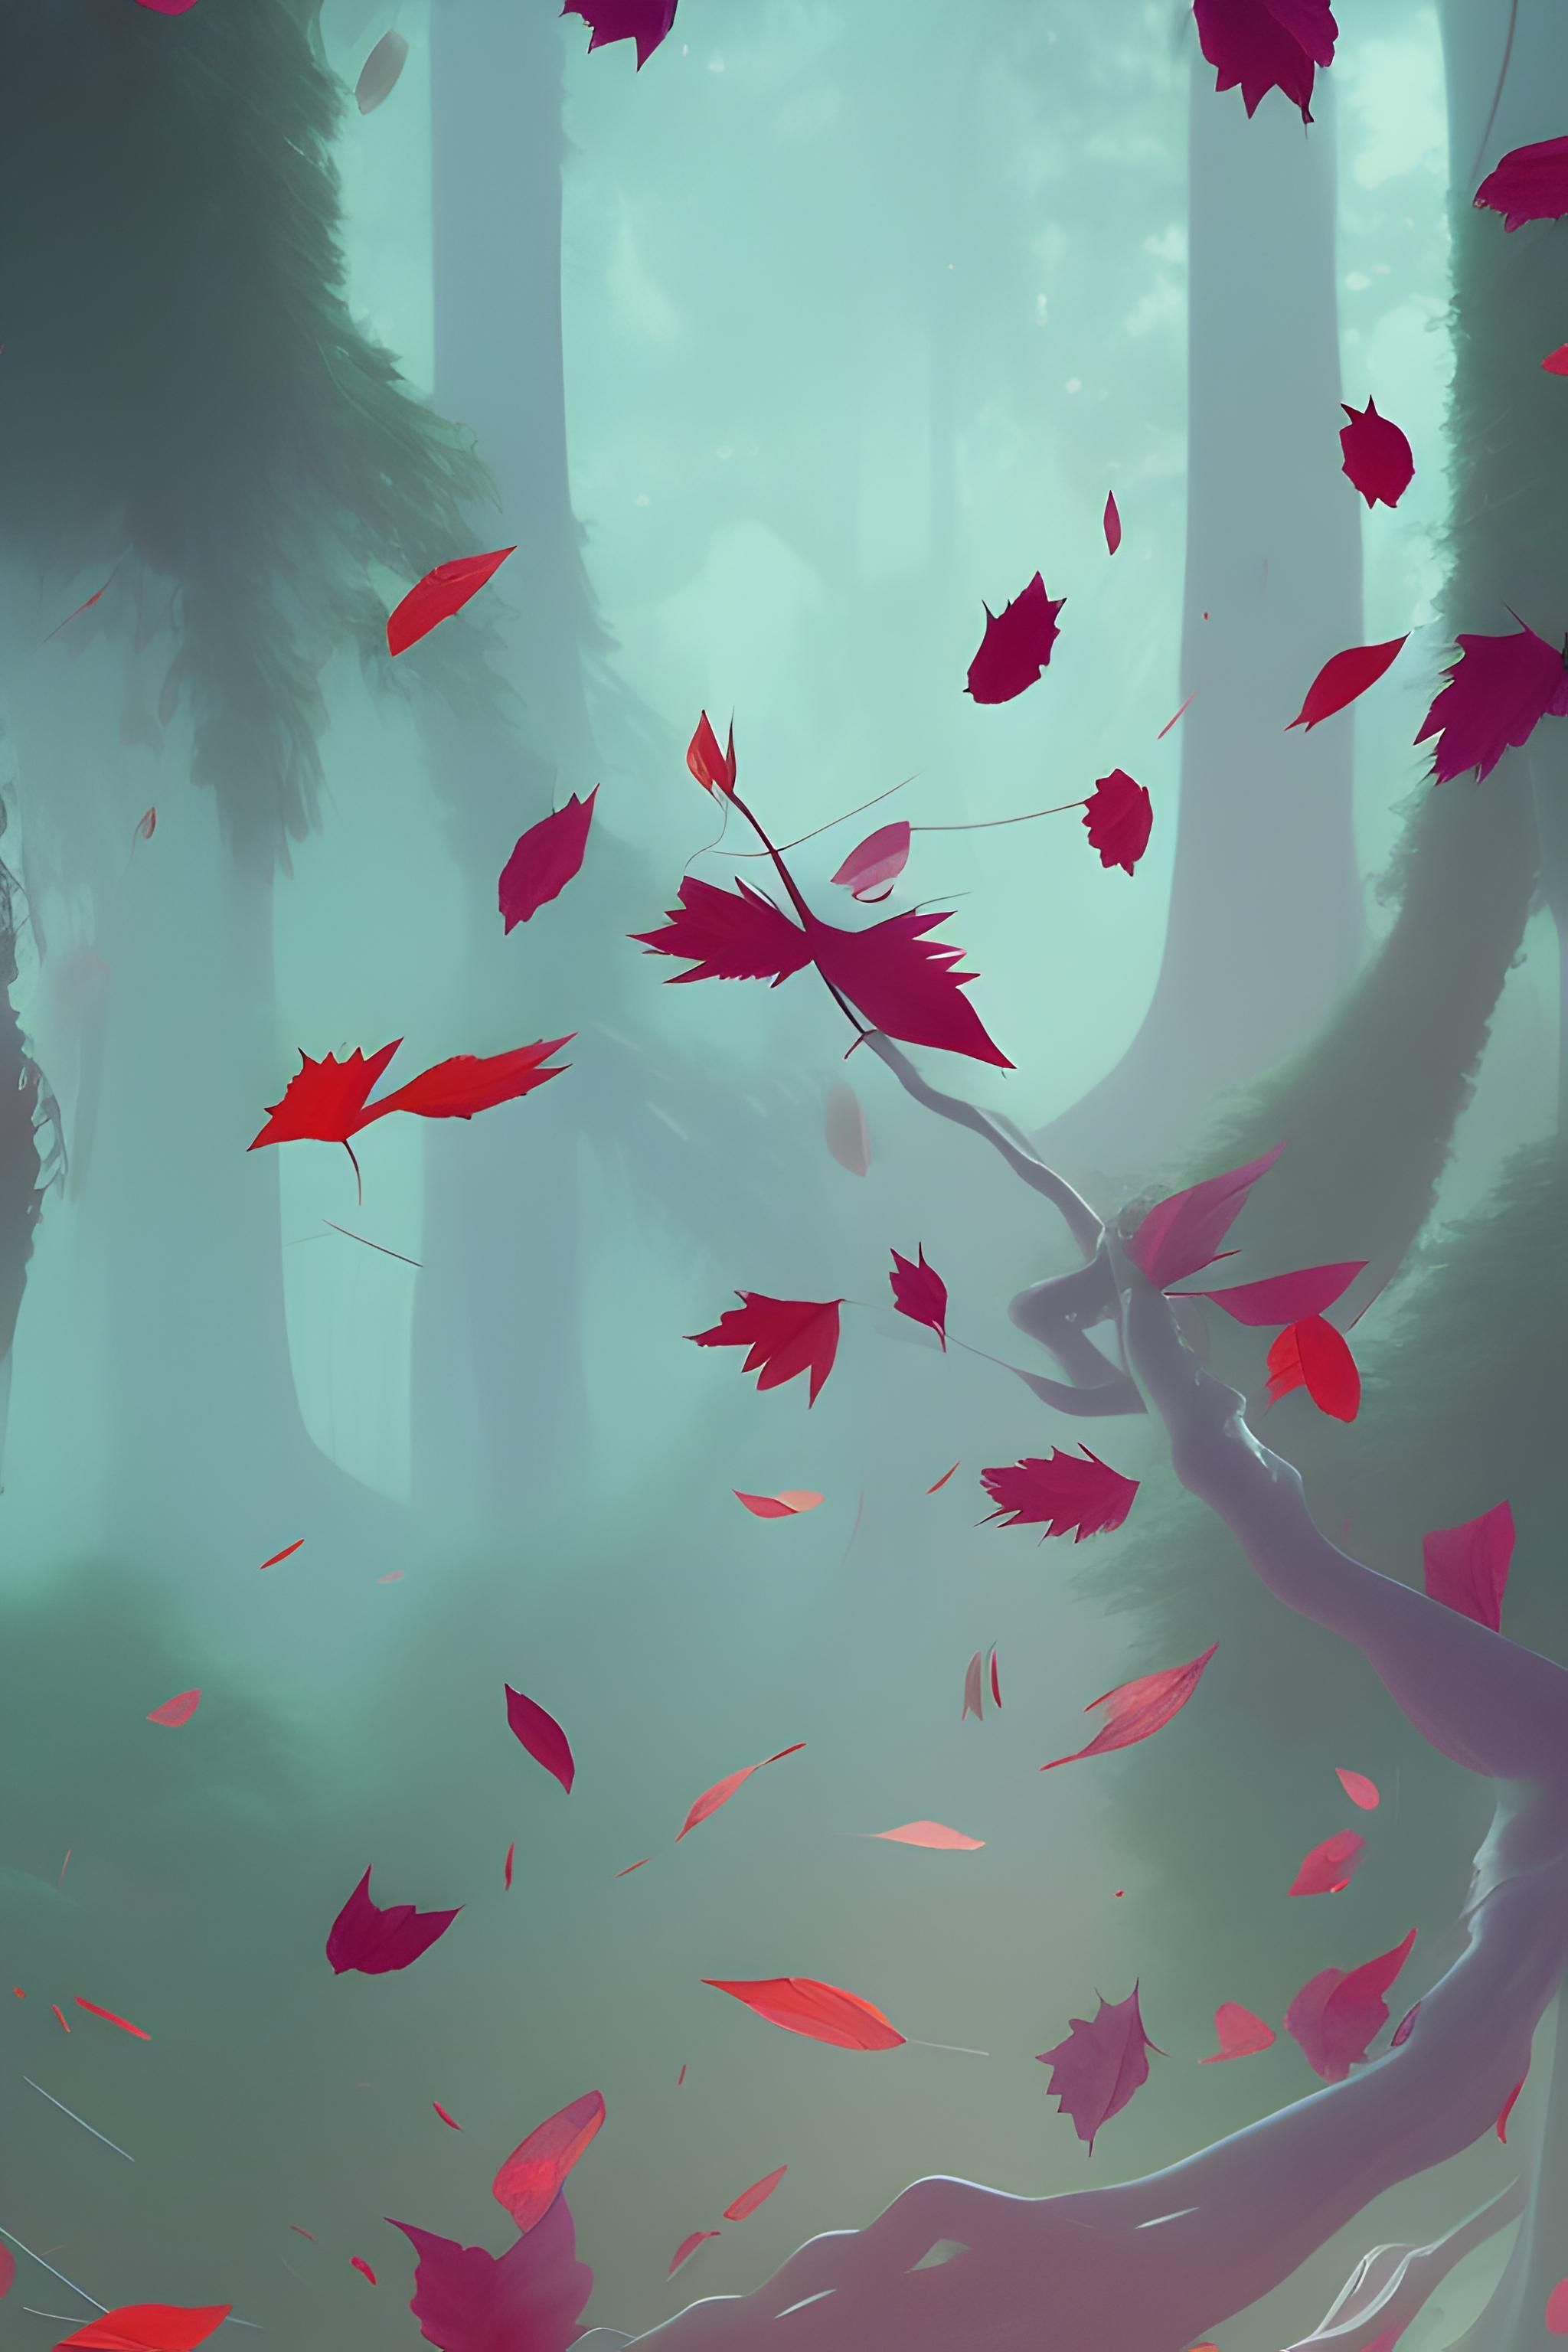 A digital painting of a forest with red leaves falling from a tree - Chinese